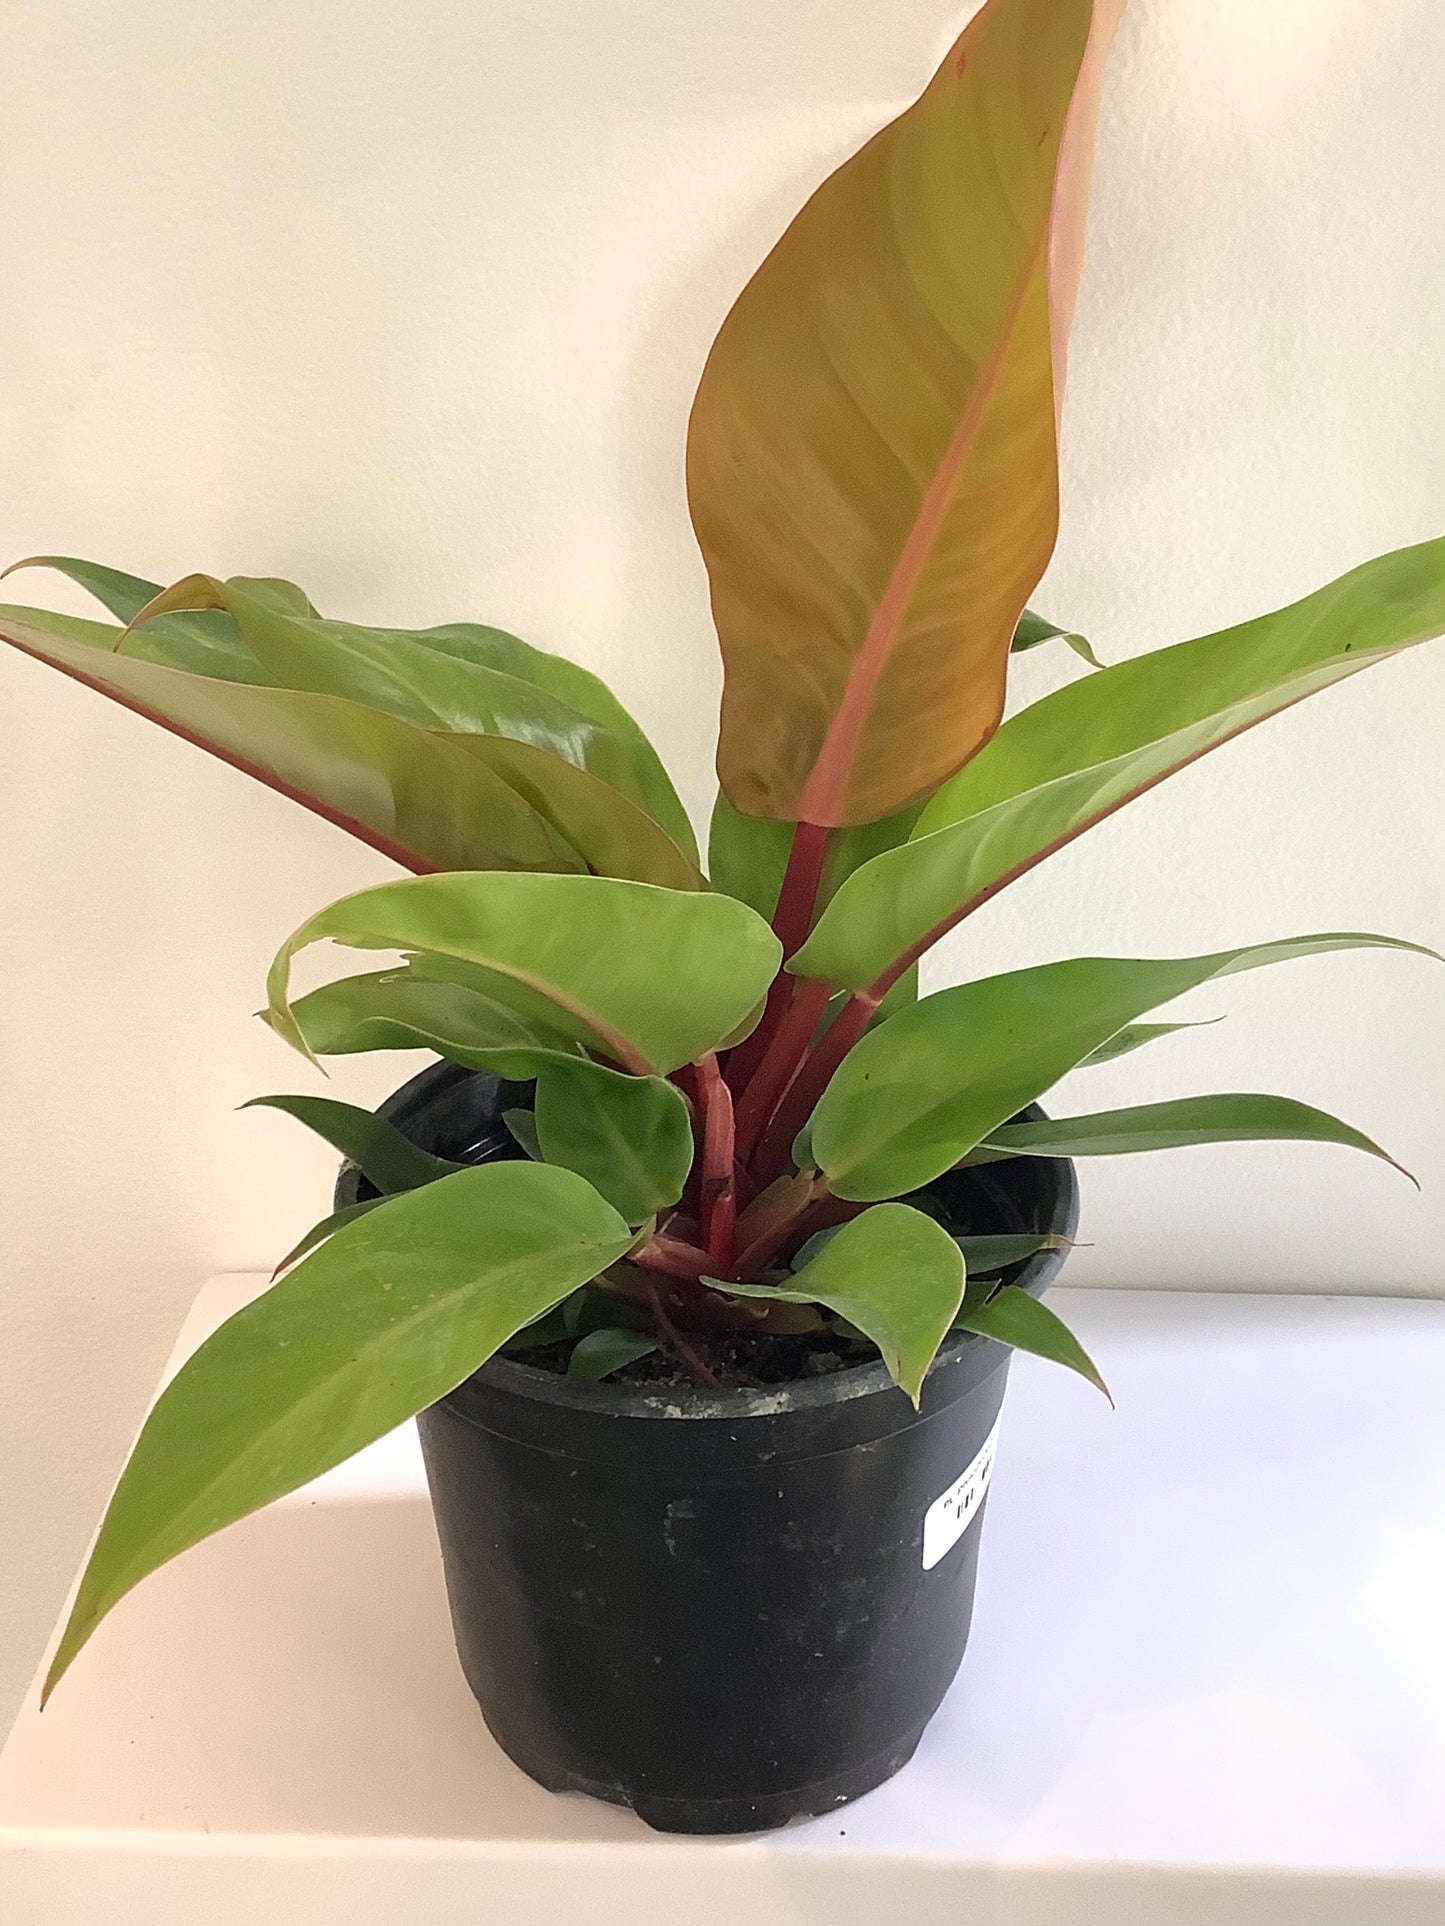 Philodendron "Prince of Orange" Plant - 6" Container